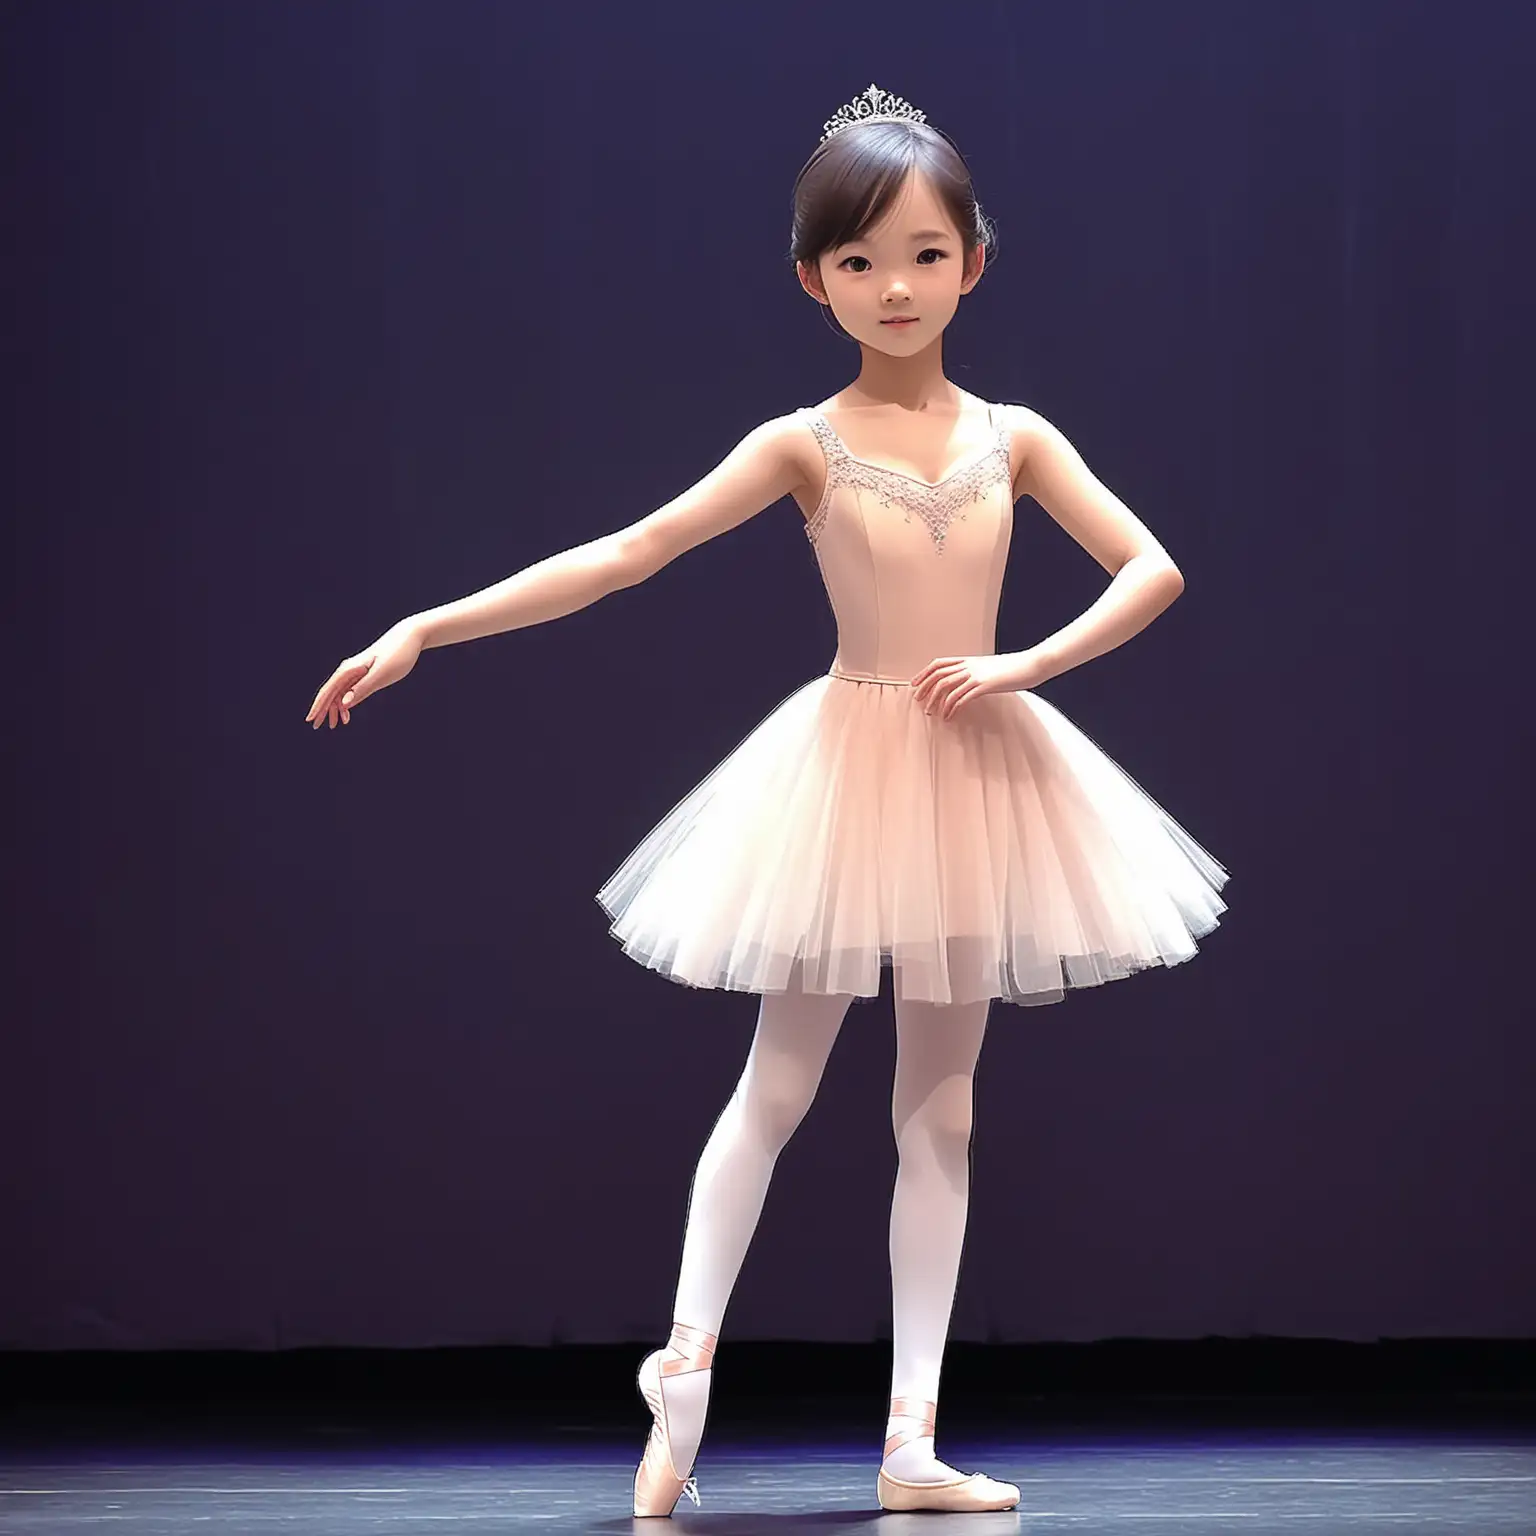 Young Ballerina in Elegant Ballet Dress on Stage